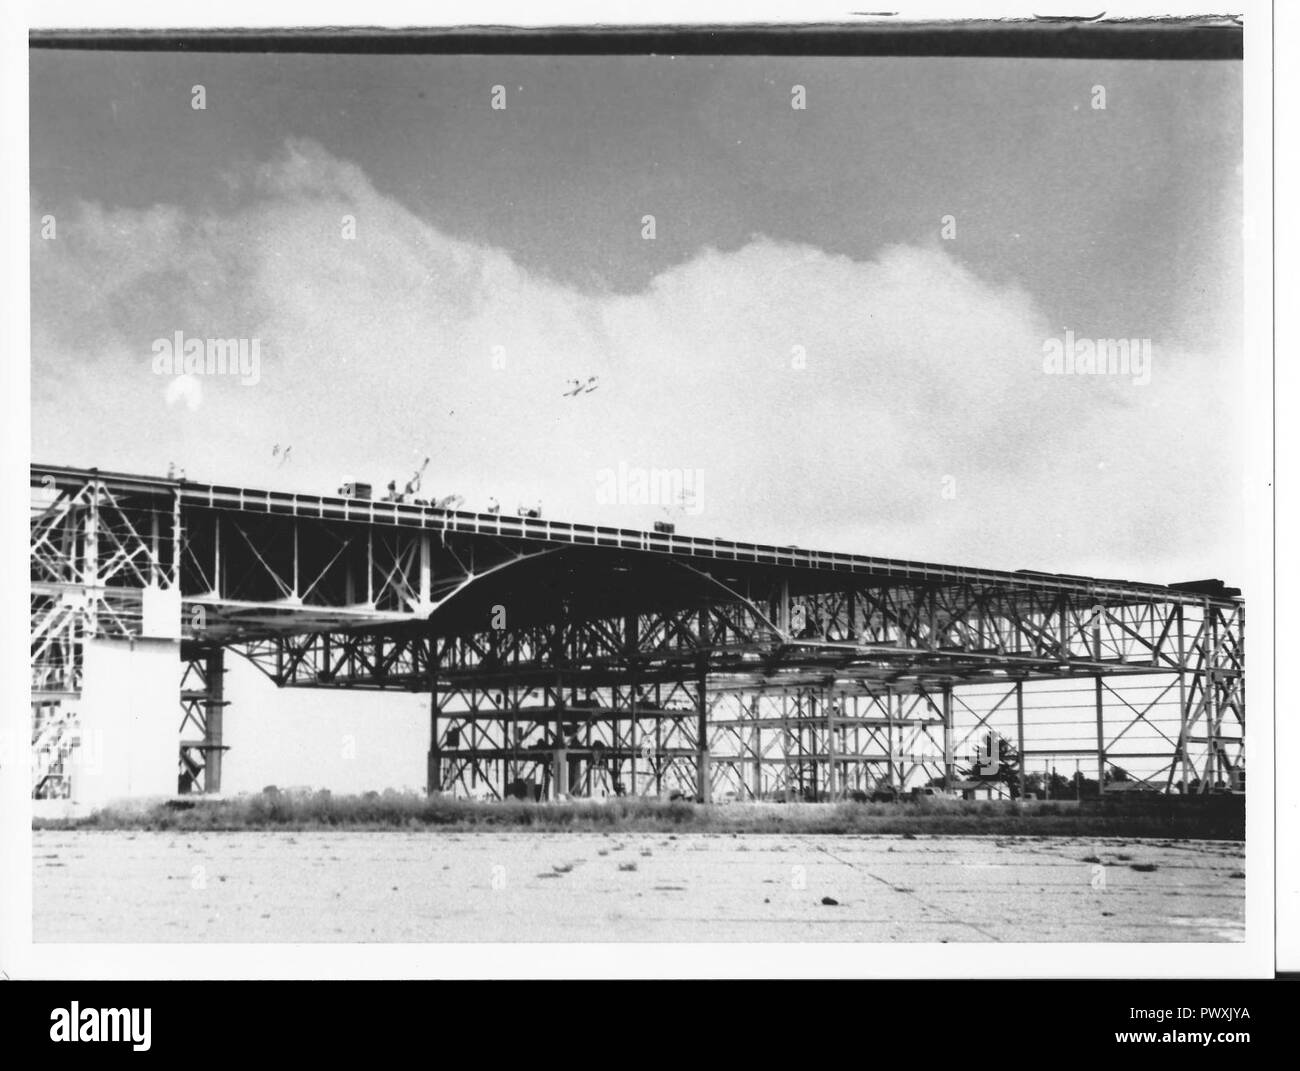 Construction of Hangar 200 is shown at Bunker Hill Naval Air Station. July 1, marks the 75th Anniversary of the base’s opening as a training base for aviators. Stock Photo